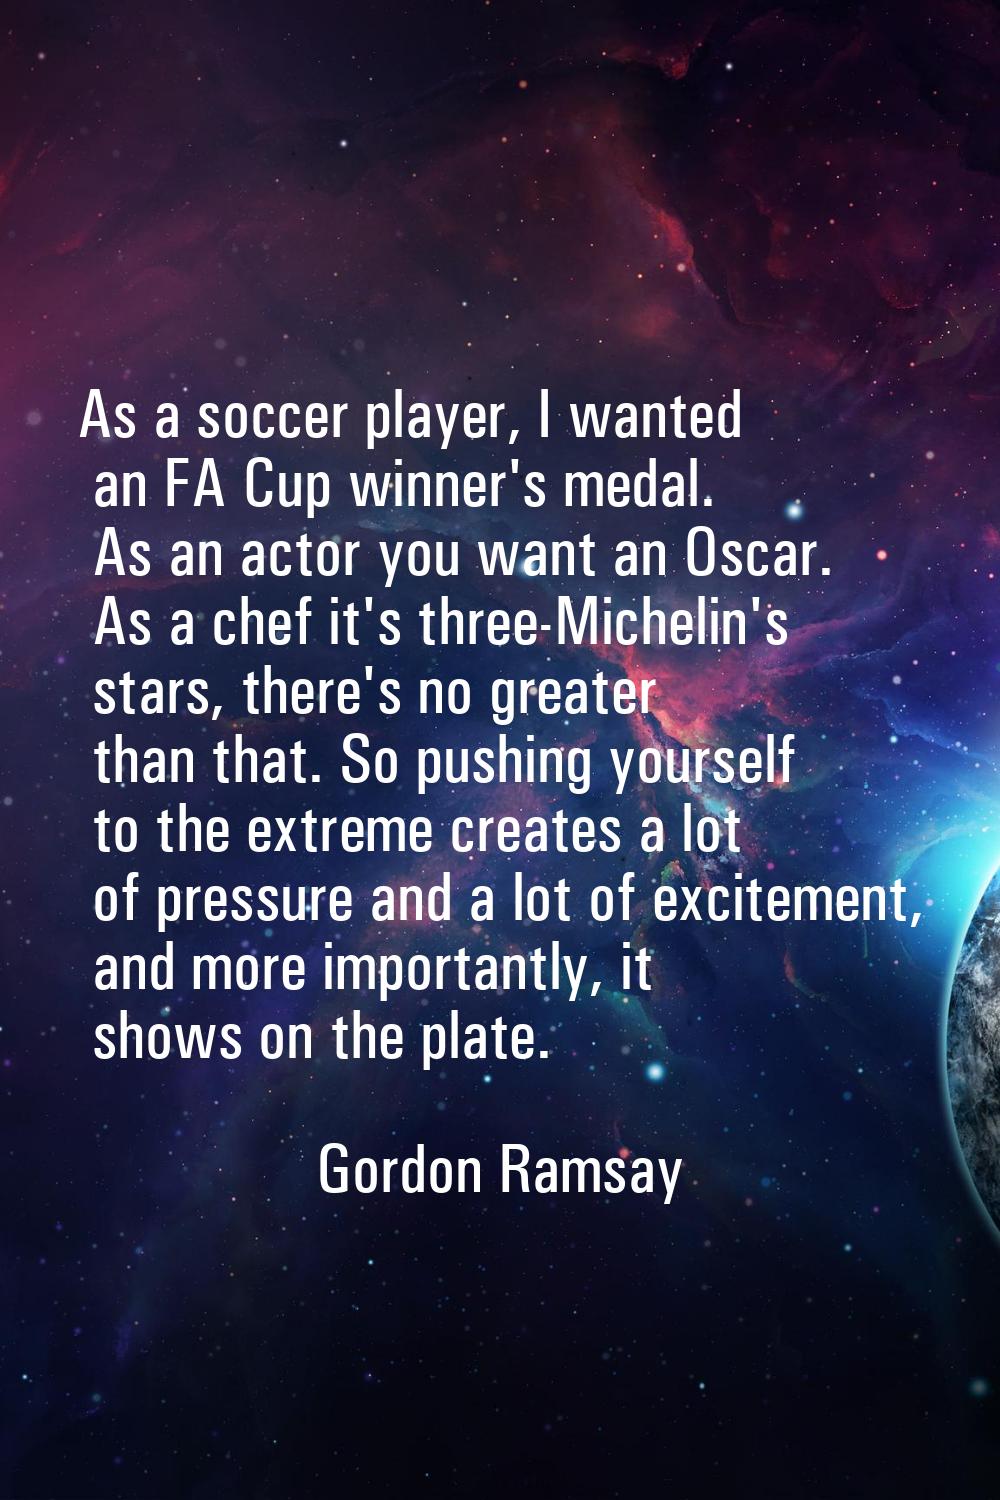 As a soccer player, I wanted an FA Cup winner's medal. As an actor you want an Oscar. As a chef it'